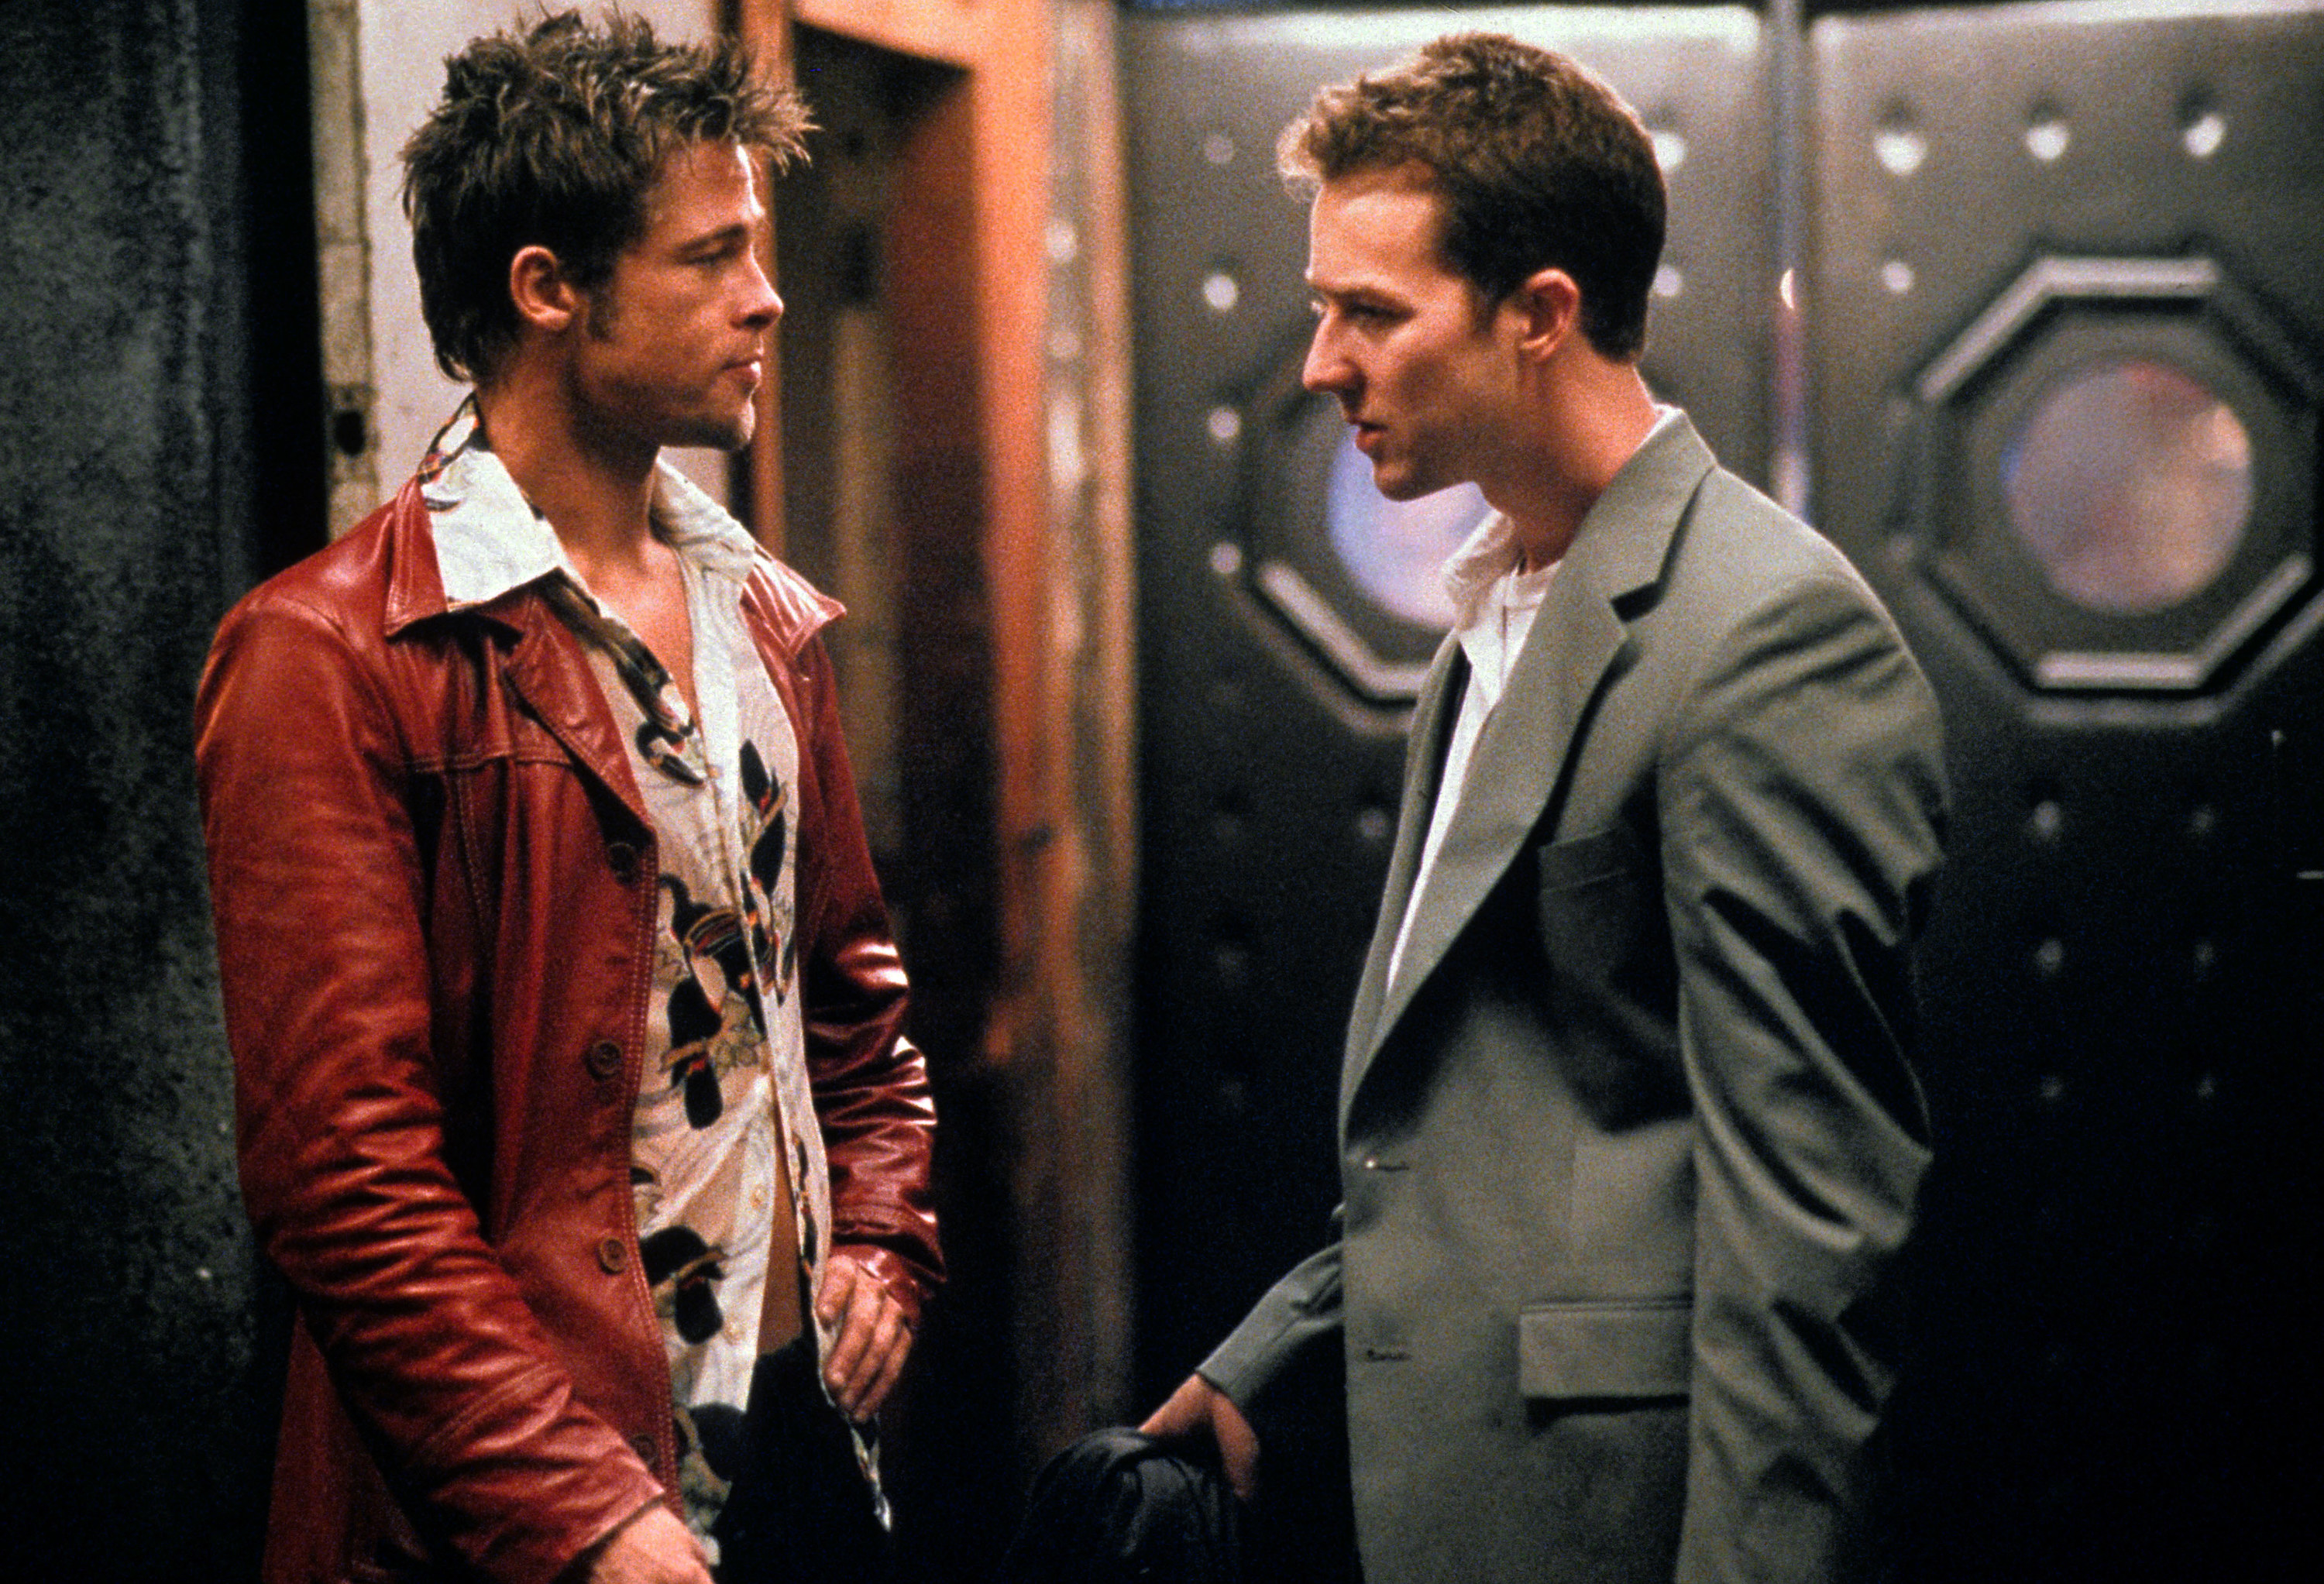 A photo of Brad Pitt and Ed Norton from Fight Club